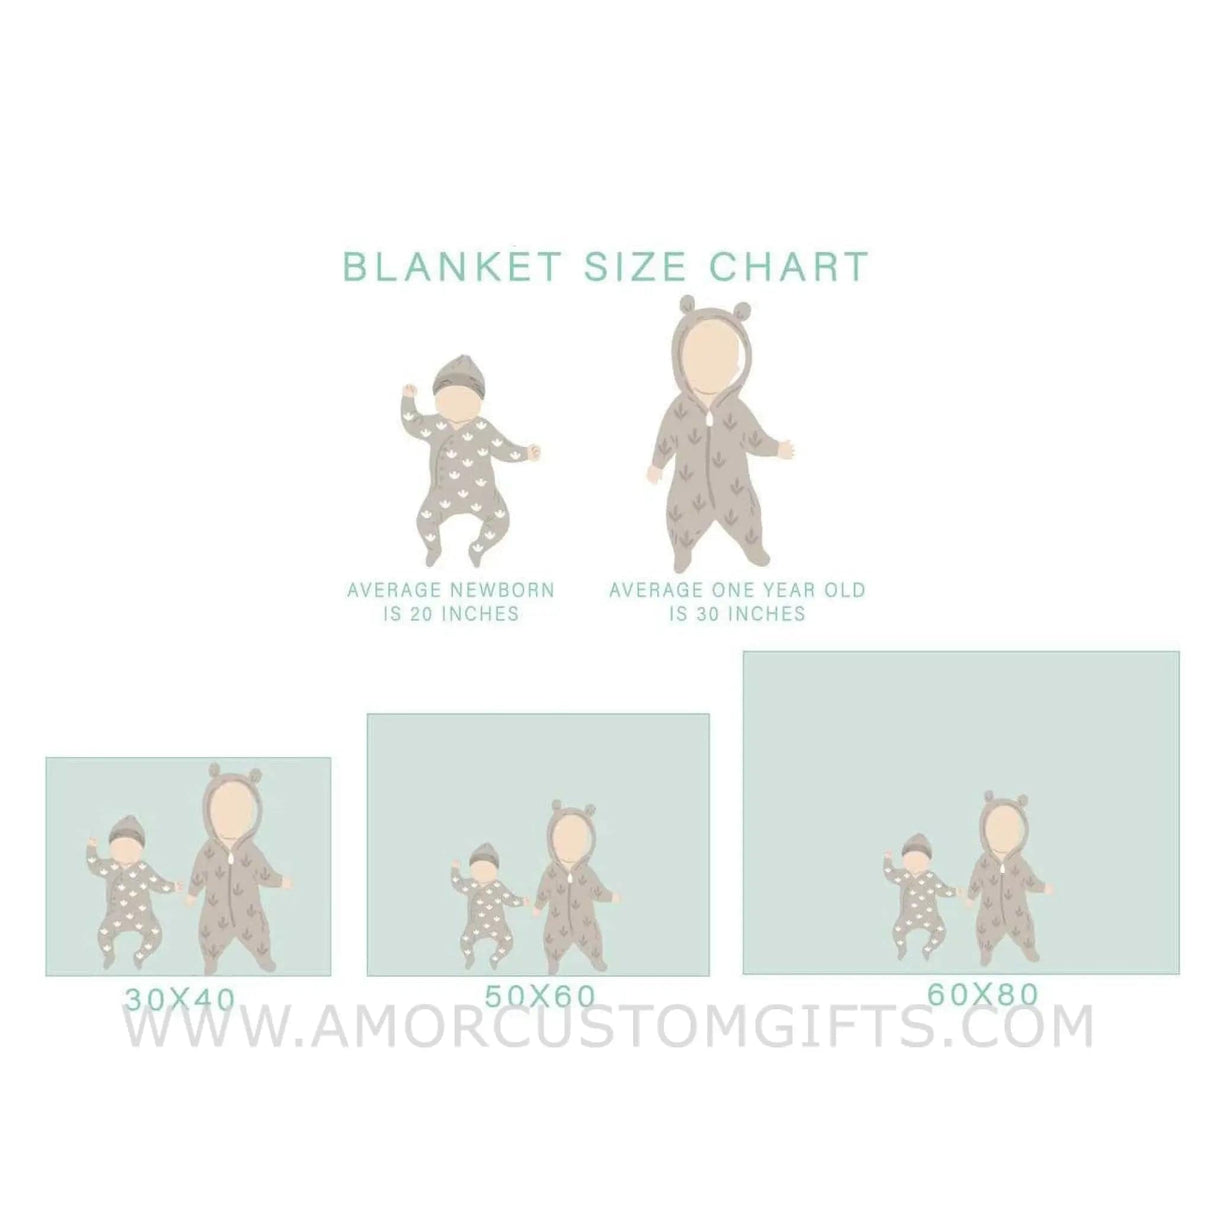 Blankets USA MADE Personalized Baby Boy Blankets, Customize Blanket with Names - Soft Flush Fleece for Newborn Blue Little Star Elephant